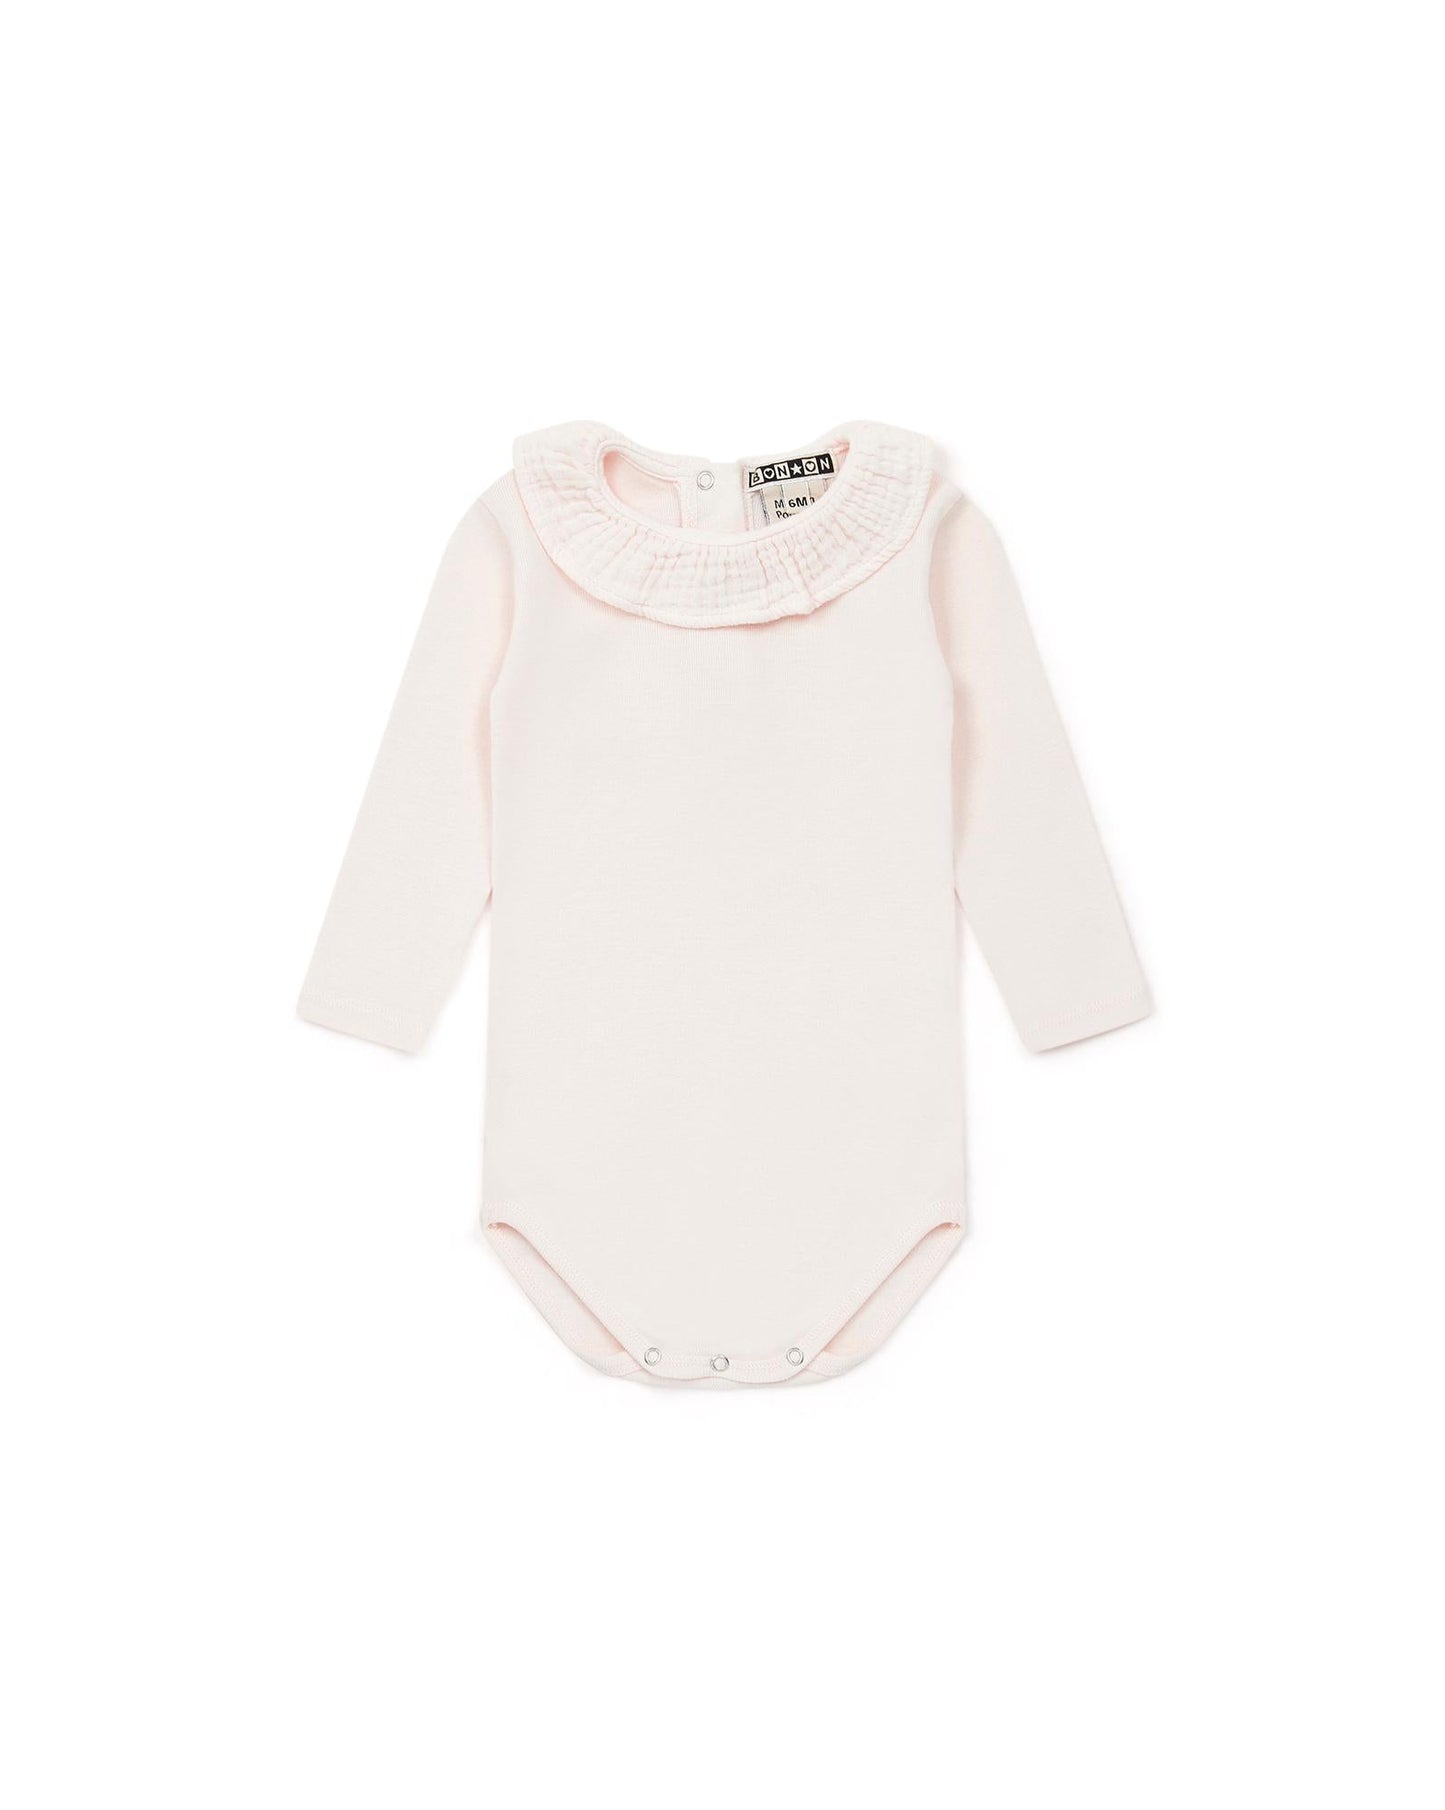 Body of Newborn Colerette Pink Baby in 100% organic cotton certified GOTS